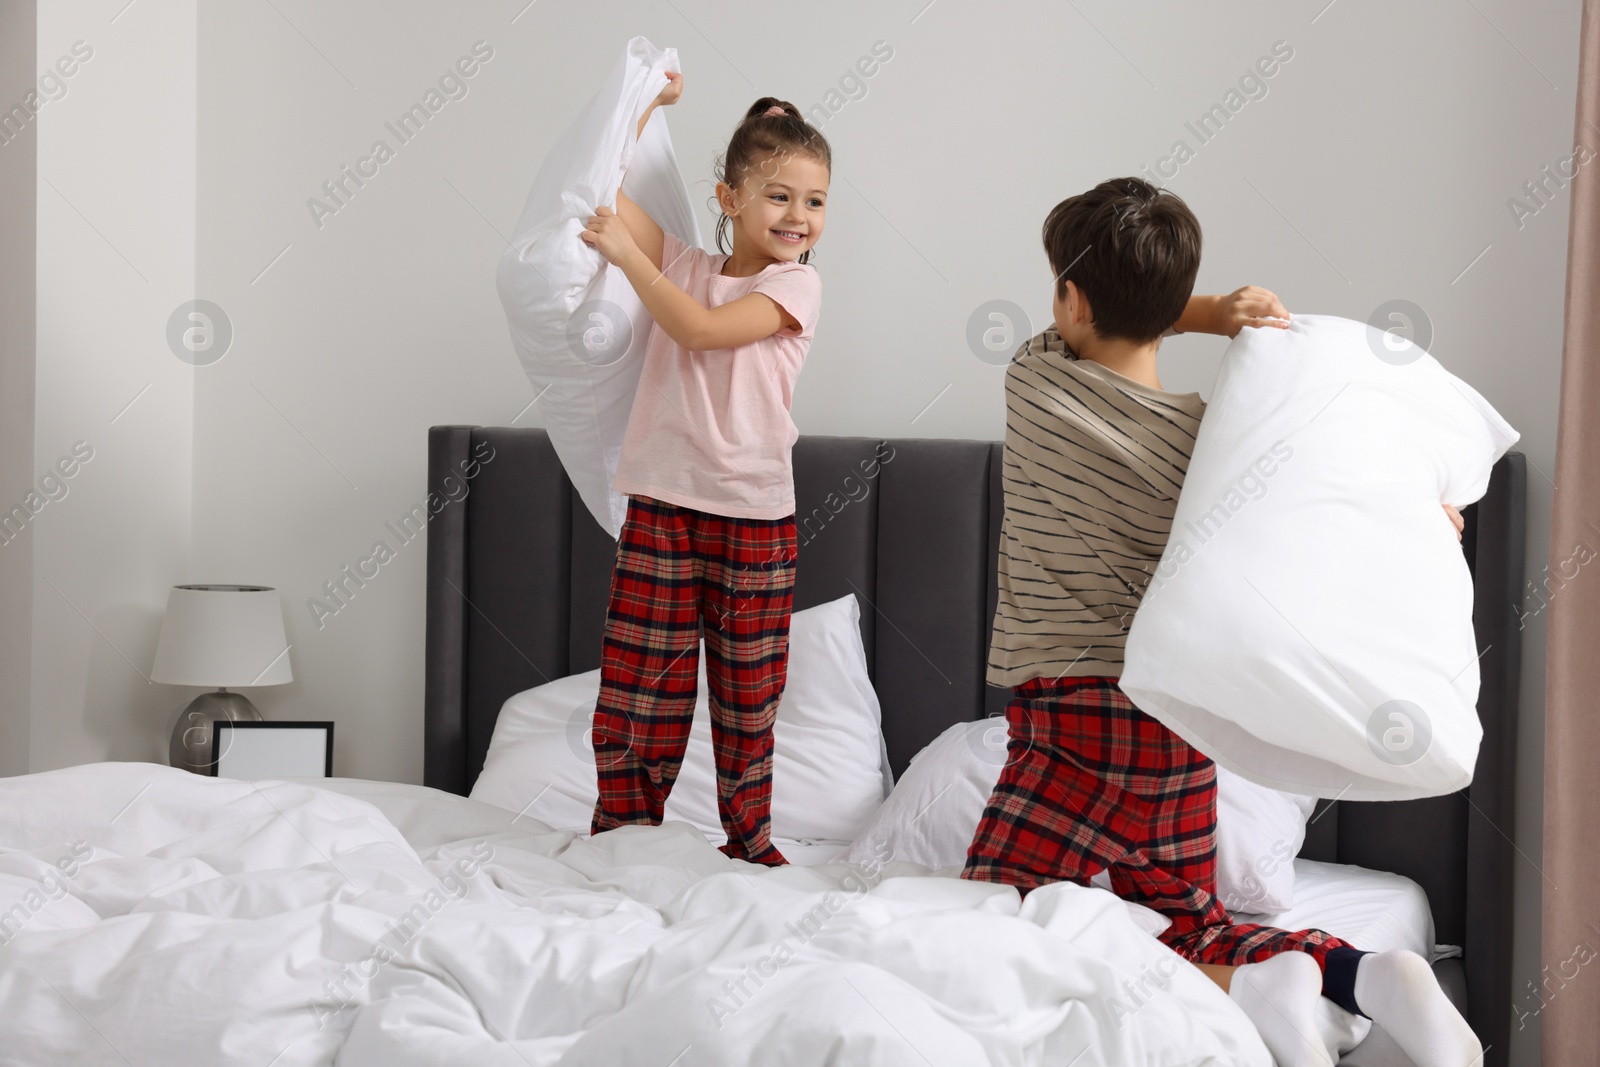 Photo of Brother and sister having pillow fight while changing bed linens in bedroom